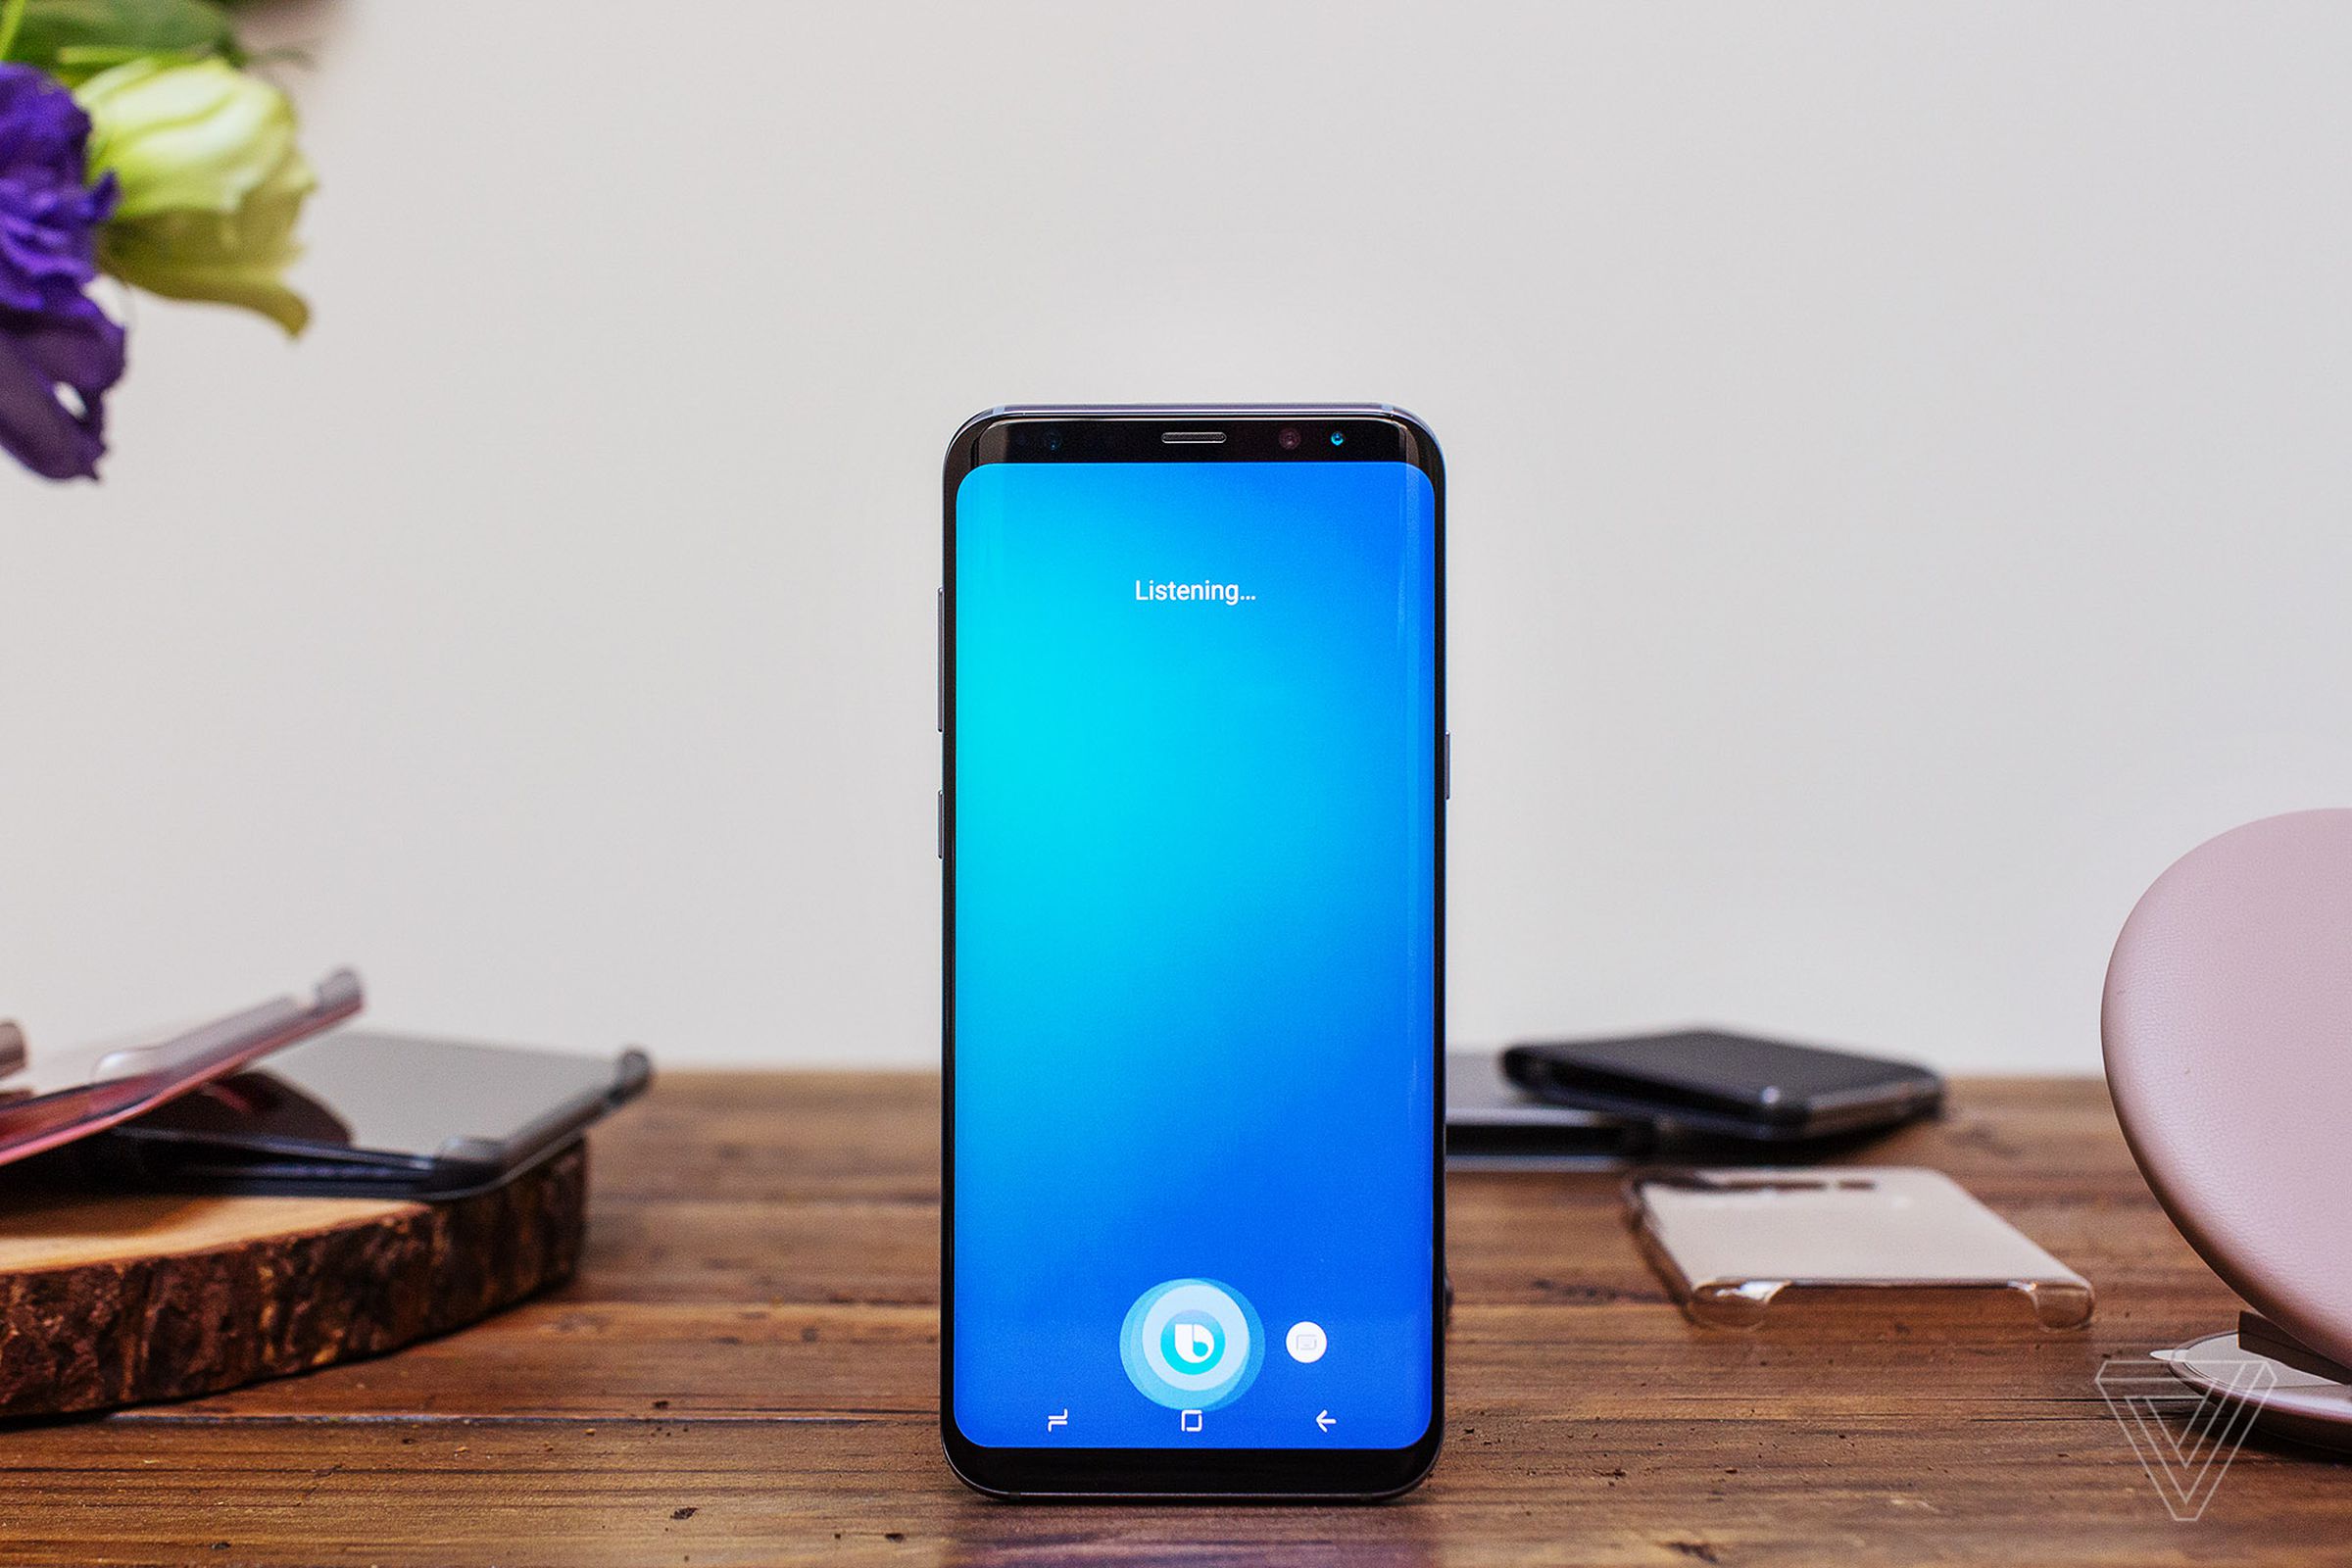 Samsung’s Bixby assistant on the S8.